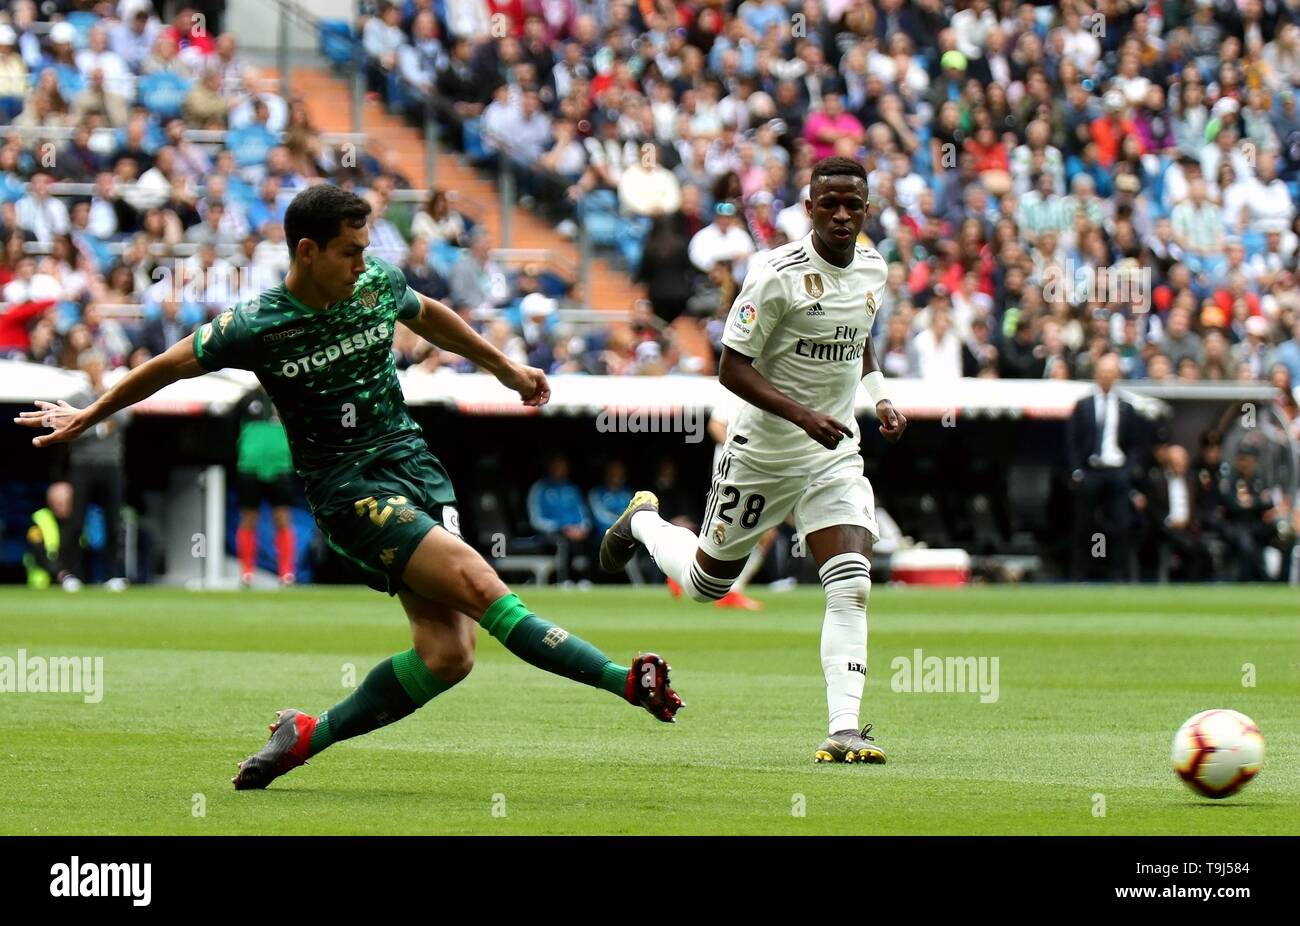 Madrid, Spain. 19th May, 2019. Real Madrid's Vinicius Junior (R) competes with Real Betis' Aissa Mandi during a 38th round Spanish league match between Real Madrid and Real Betis in Madrid, Spain, on May 19, 2019. Real Madrid lost 0-2. Credit: Edward F. Peters/Xinhua/Alamy Live News Stock Photo